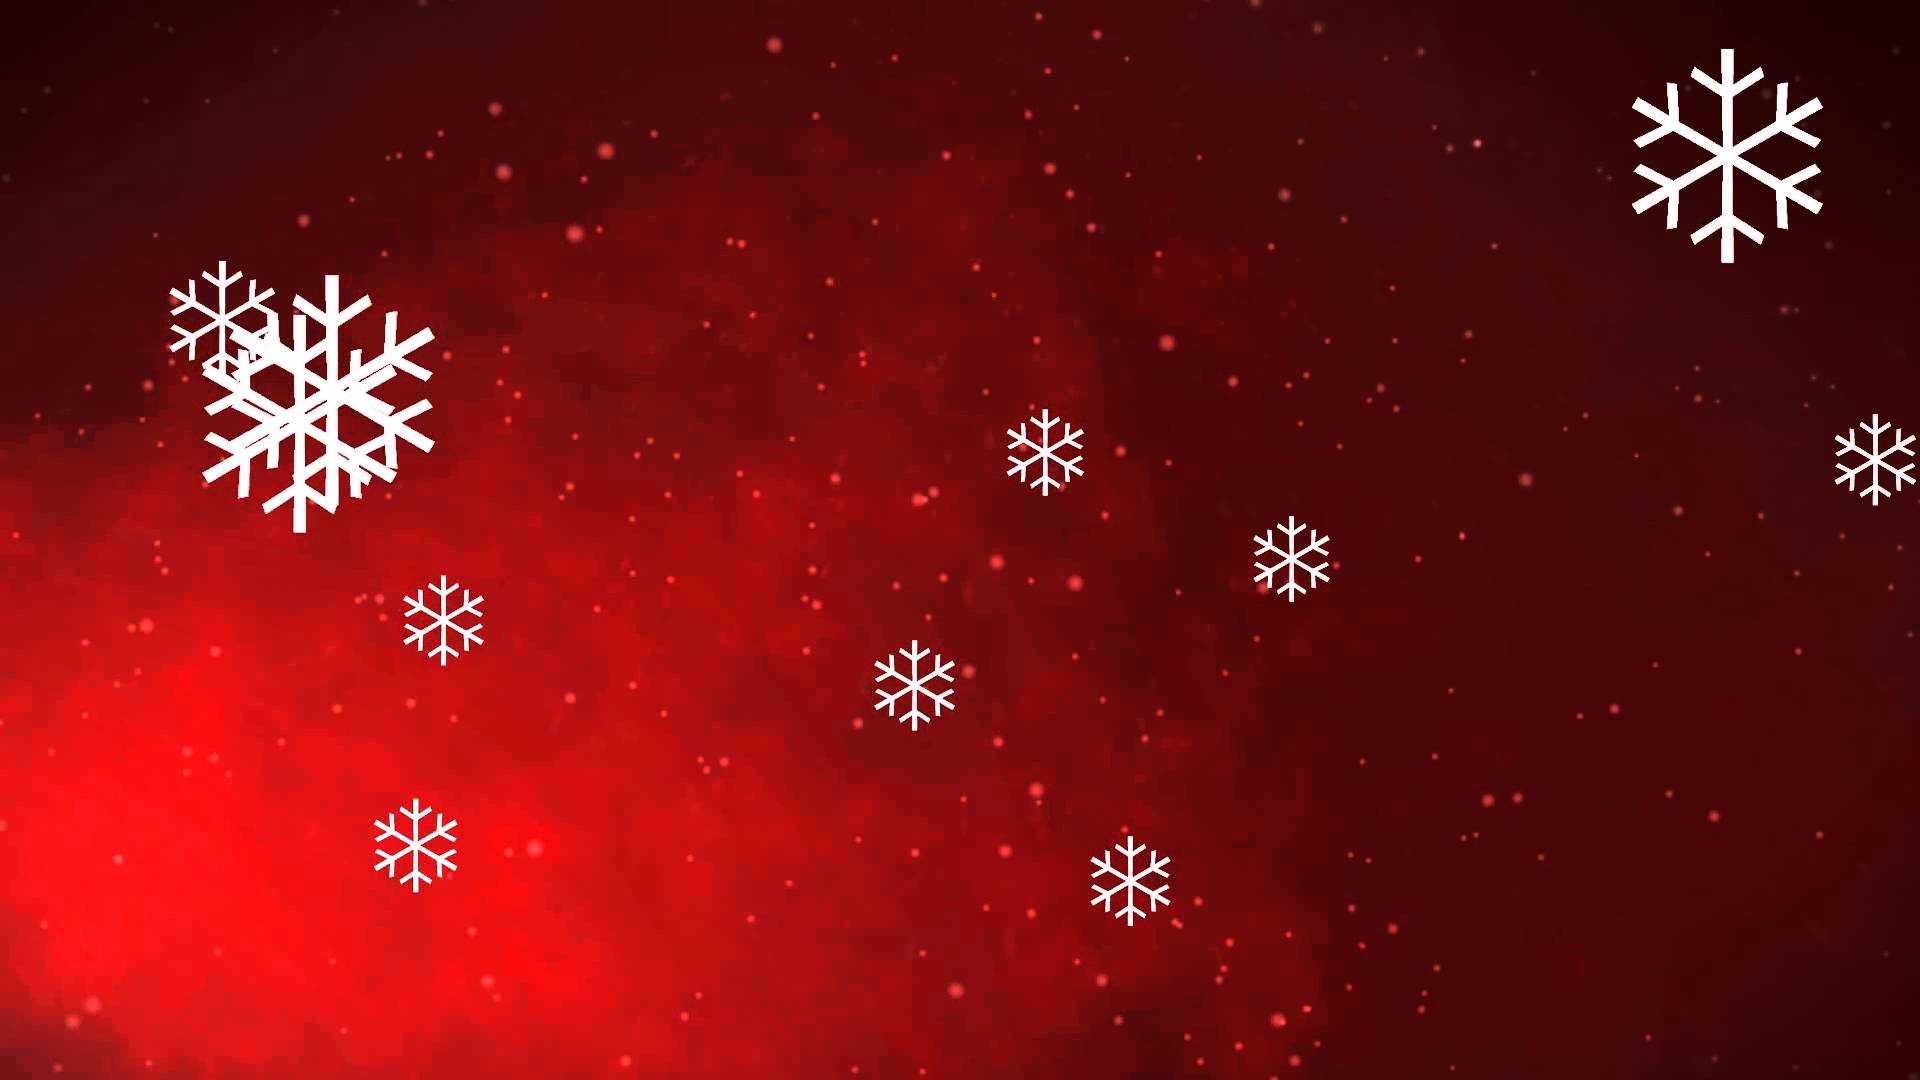 Christmas Snowflakes Backgrounds - Free Animation Footage - YouTube